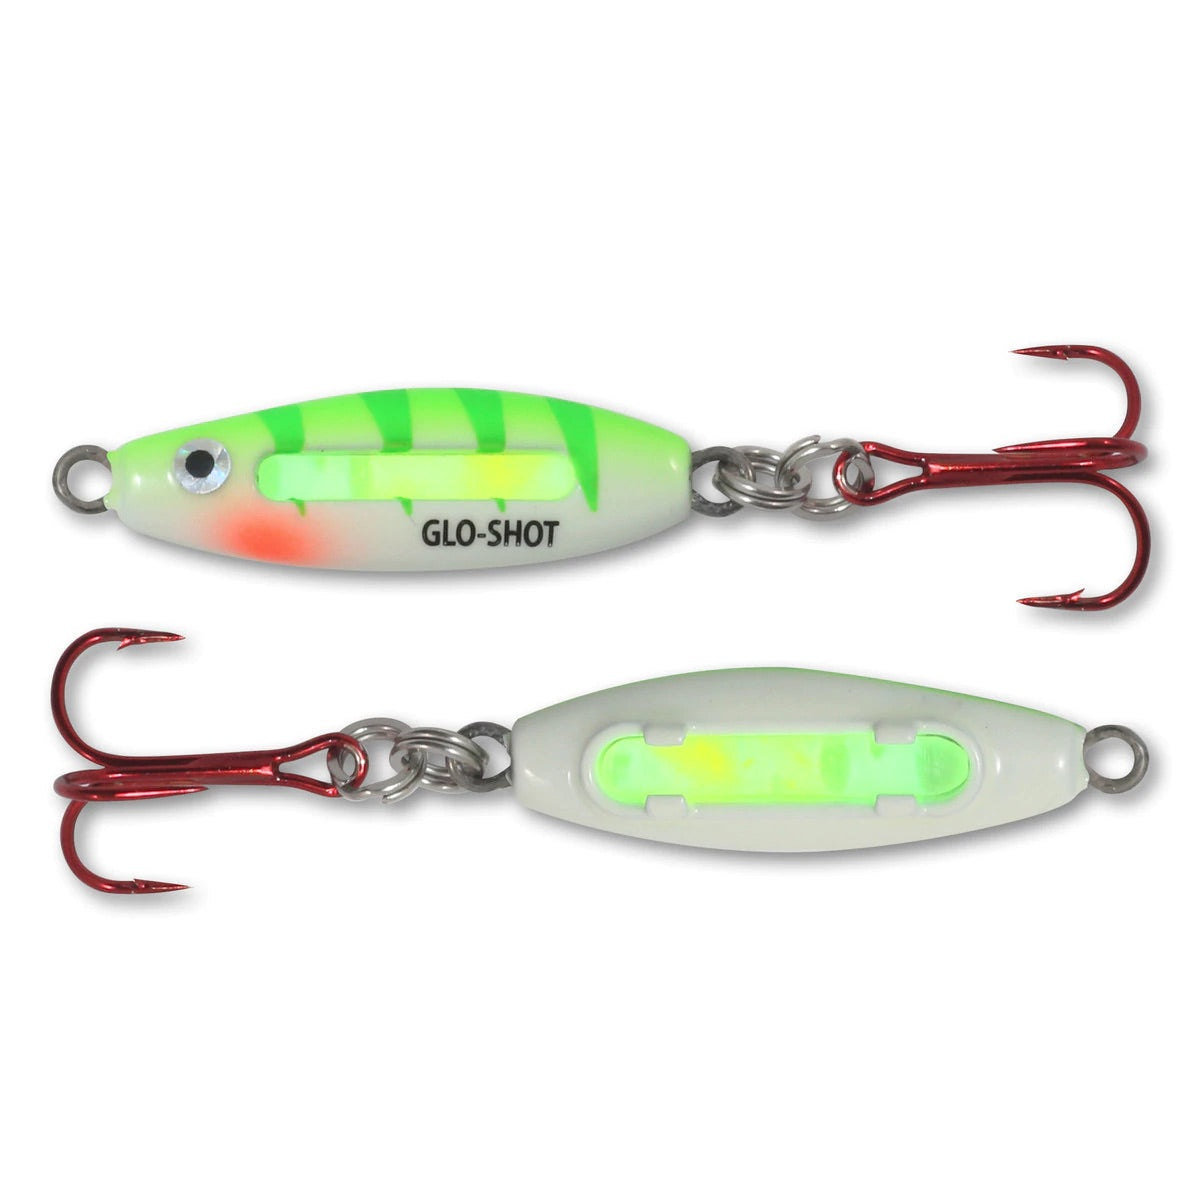 Northland Glo-Shot Fire-Belly Spoon